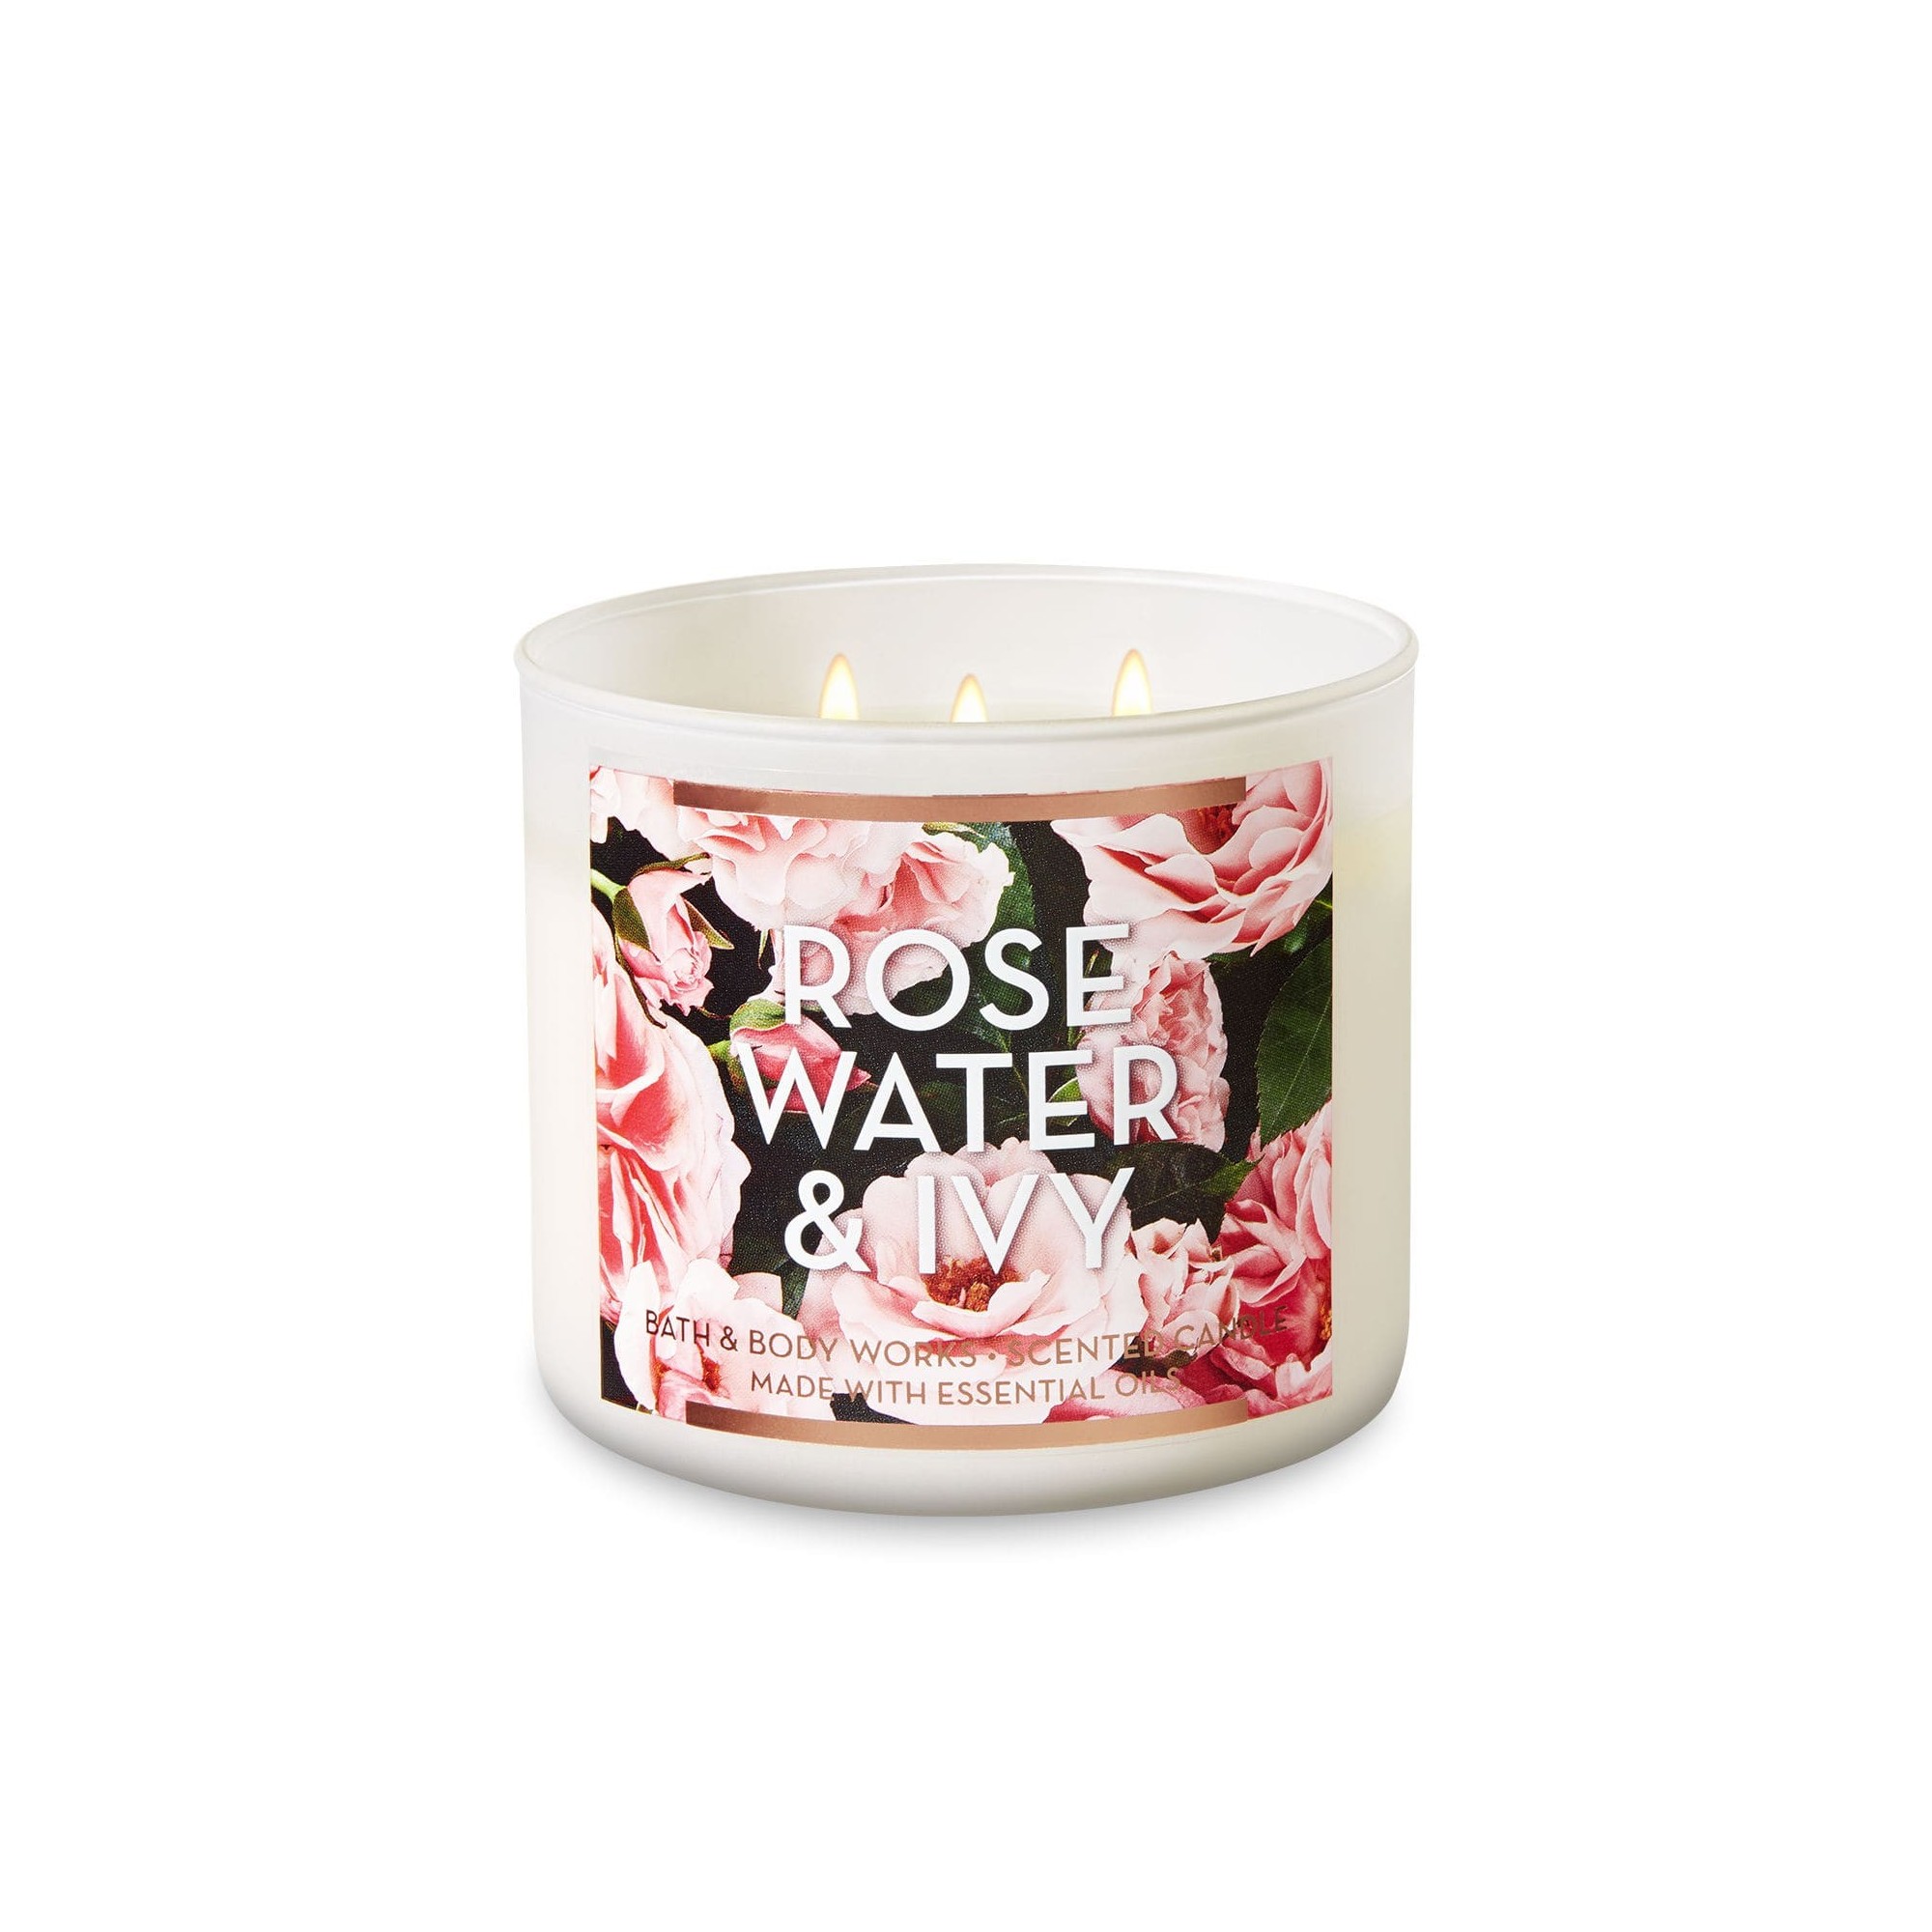 Bath & Body Works Rose Water & Ivy 3 Wick Scented Candle